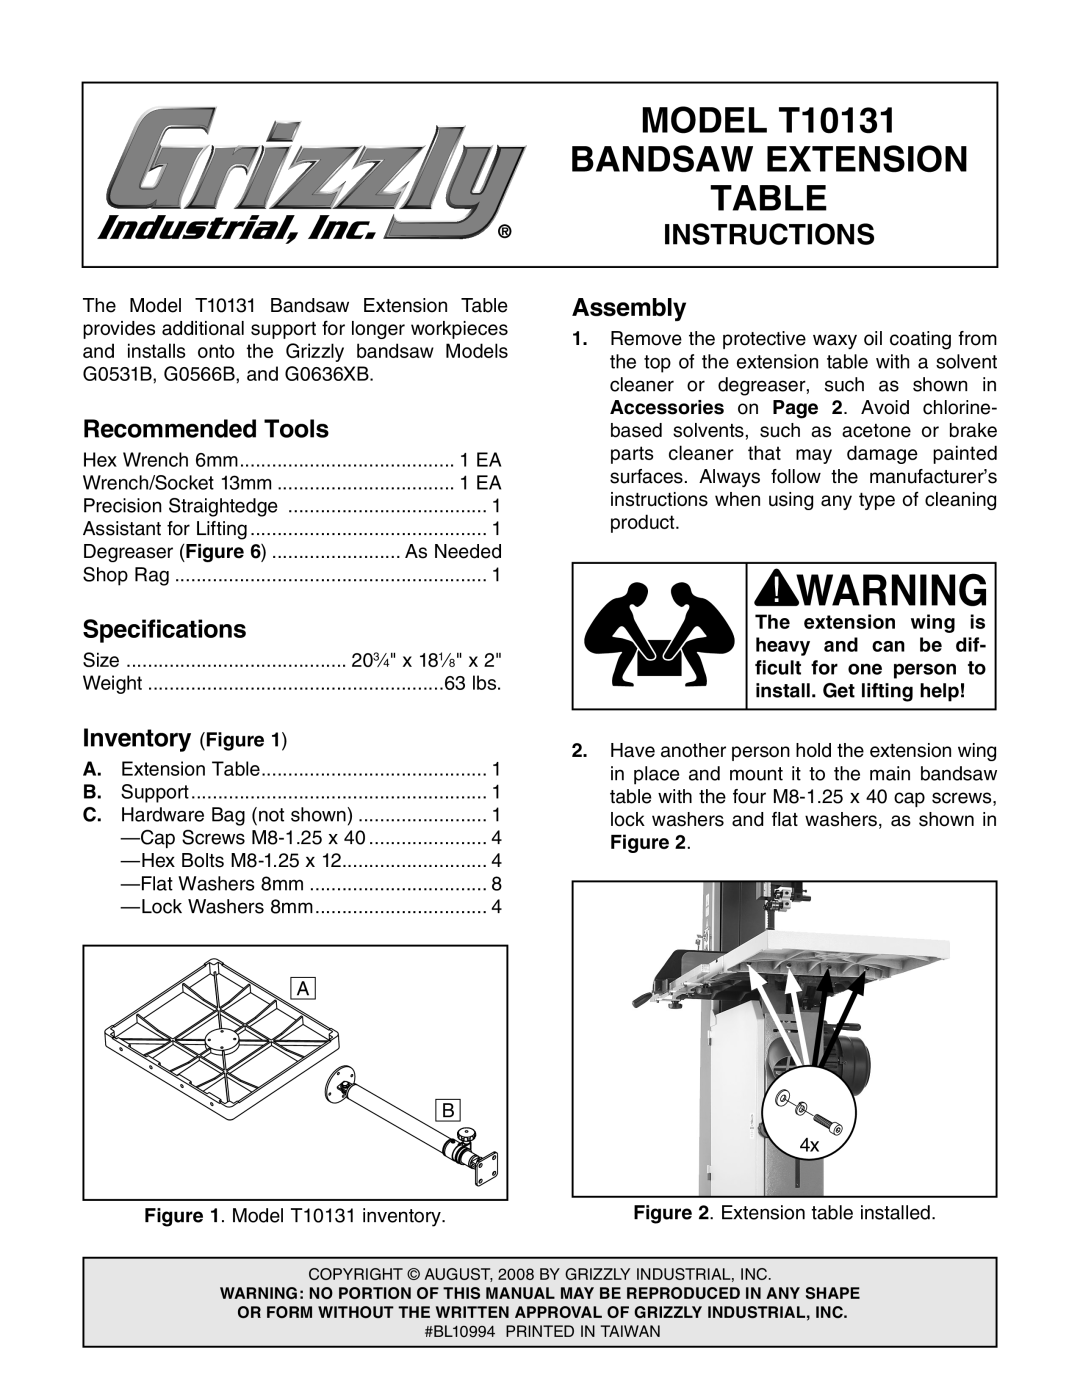 Grizzly specifications Recommended Tools, Specifications, Inventory Figure, Assembly, MODEL T10131, Bandsaw Extension 